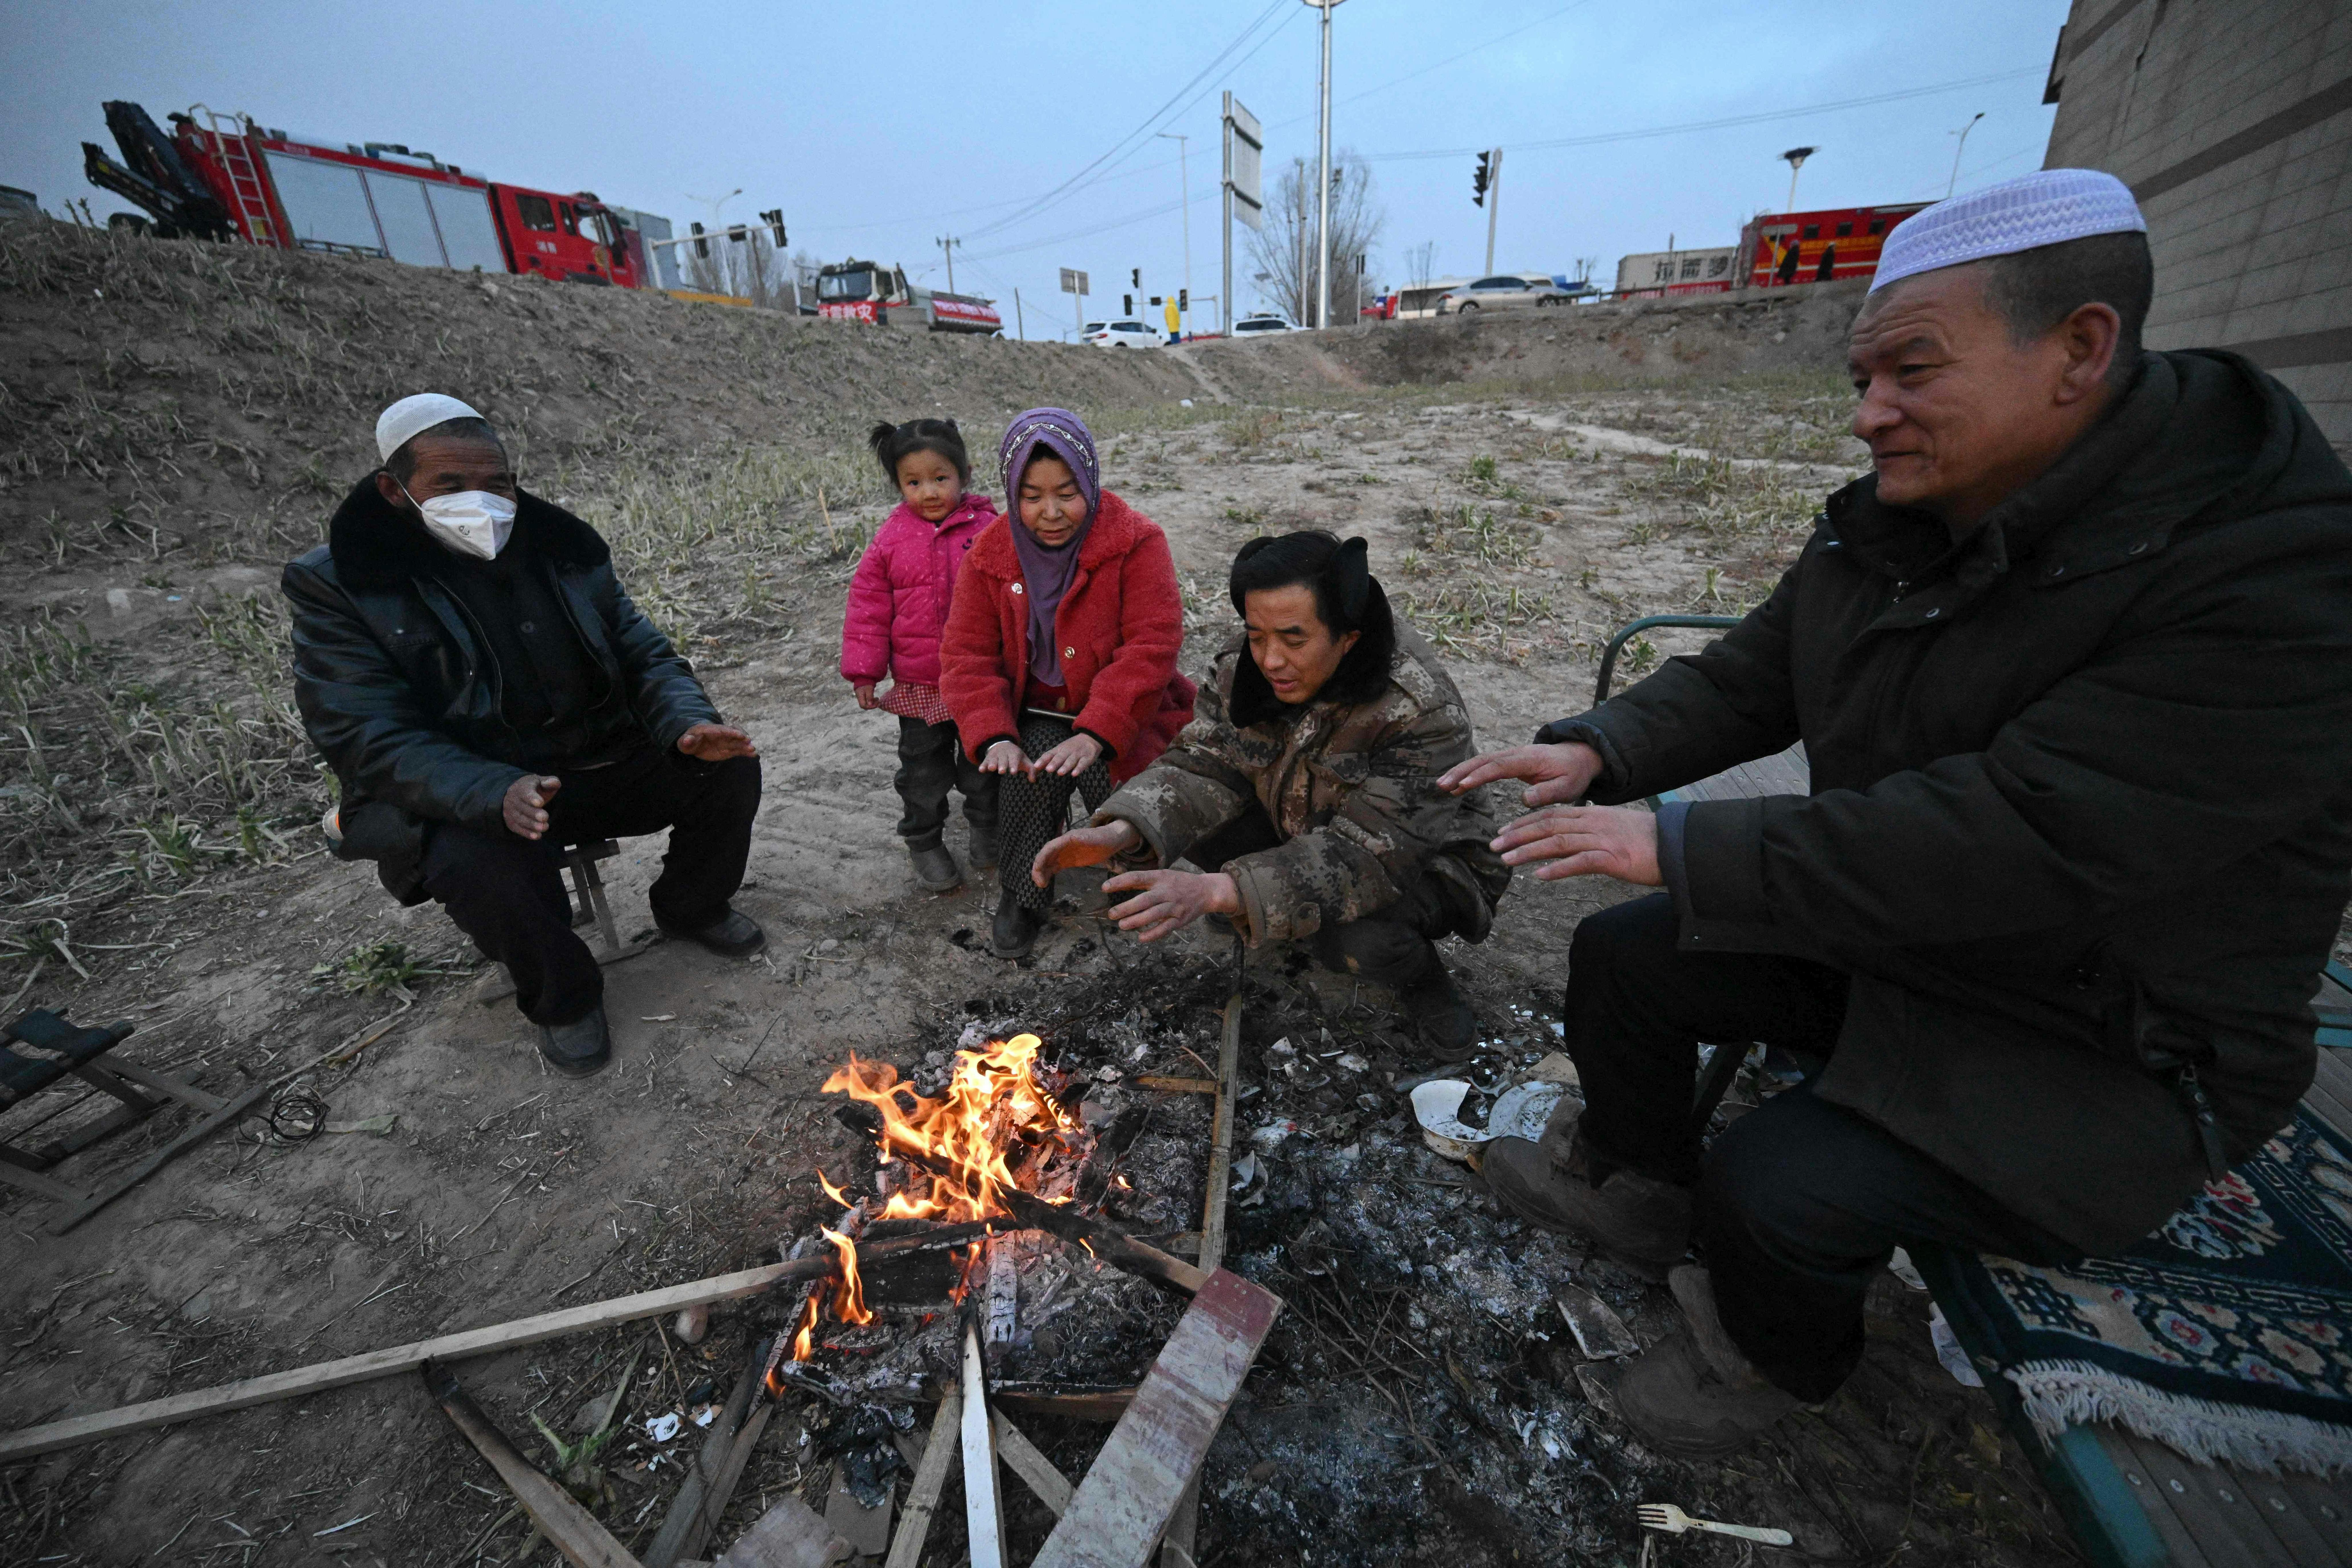 TOPSHOT - People gather next to a fire after an earthquake in Dahejia, Jishishan County in northwest China's Gansu province on December 19, 2023. (Photo by Pedro Pardo / AFP)